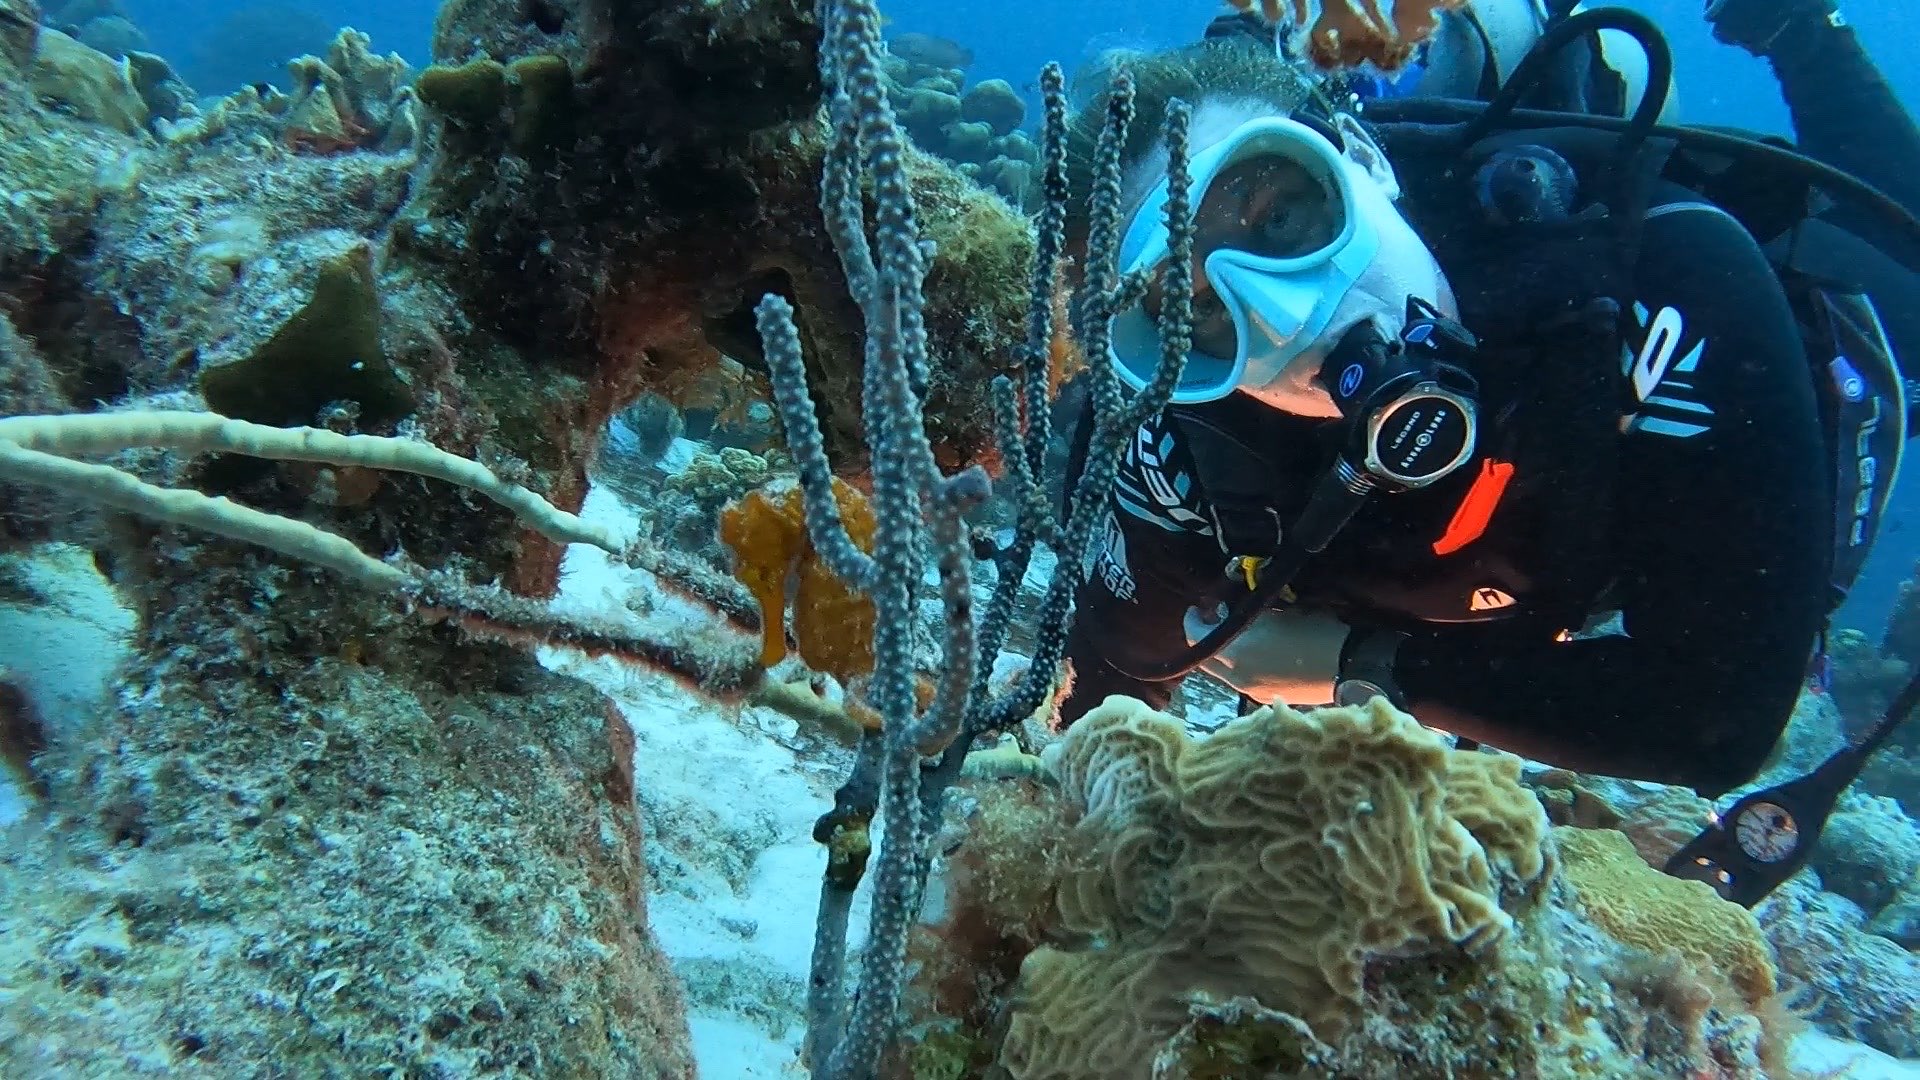 Diver looking at a coral underwater